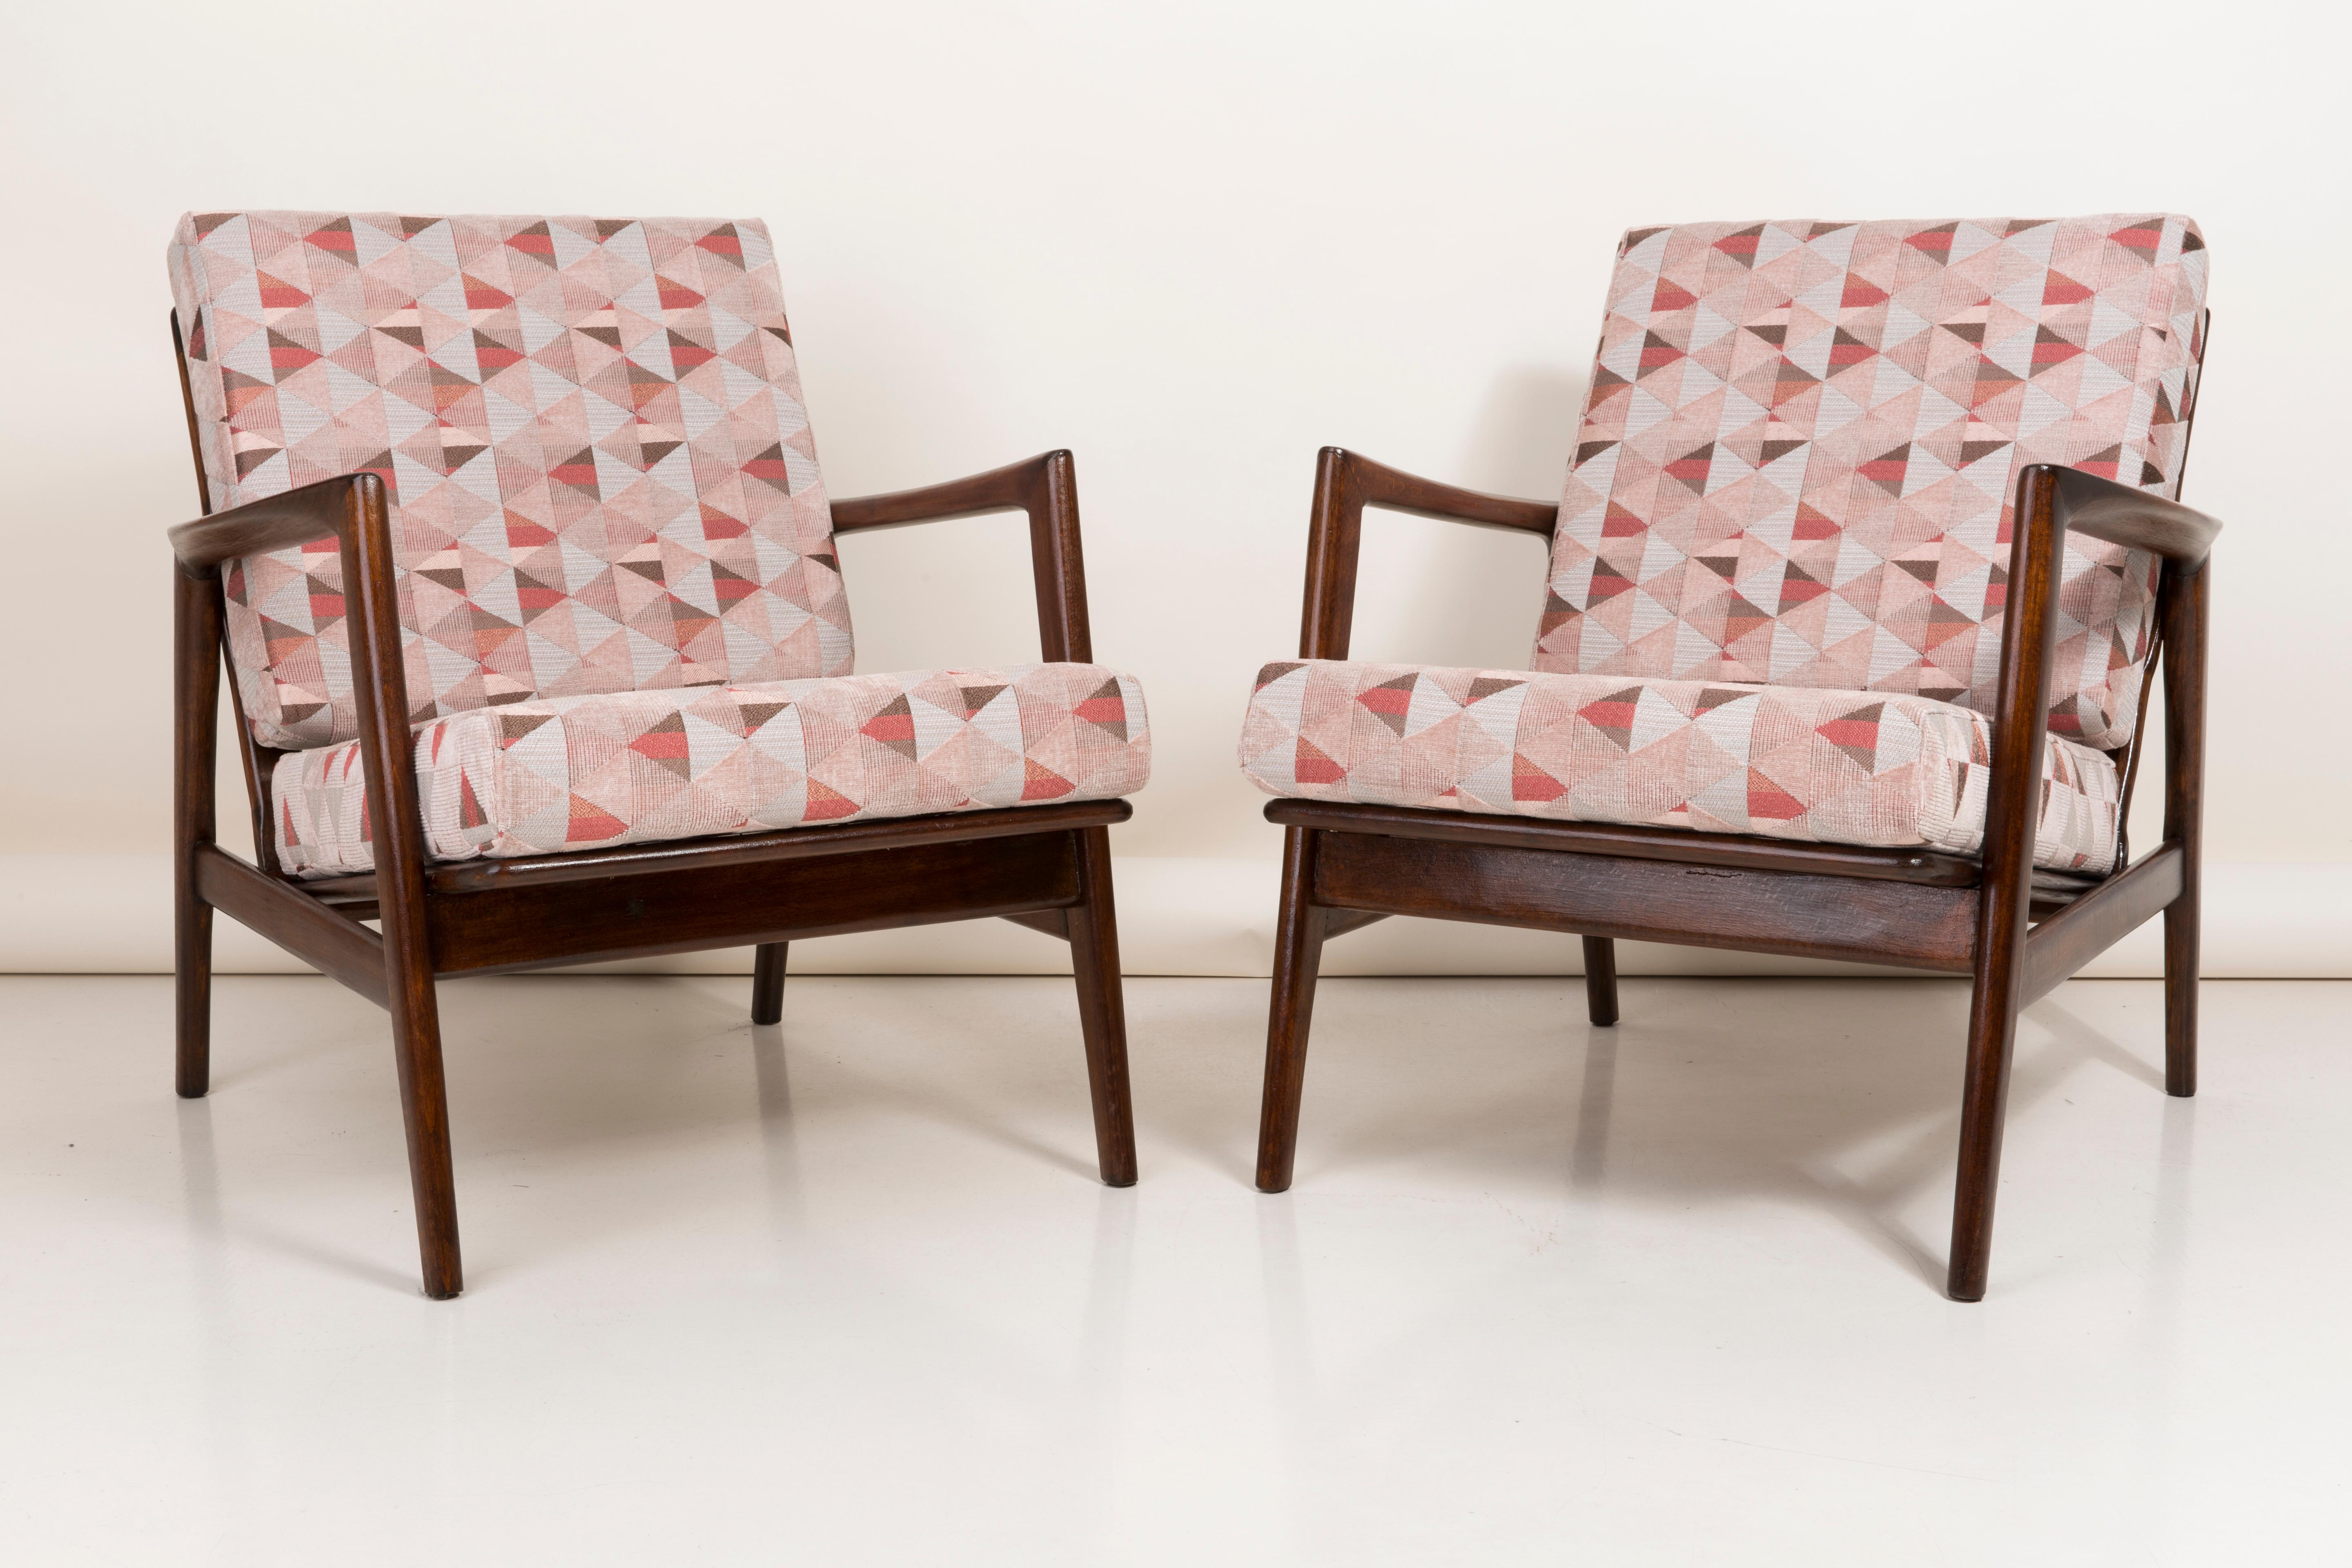 Hand-Crafted Pair of Geometric Pink Print Velvet Armchairs, 1960s, Poland For Sale